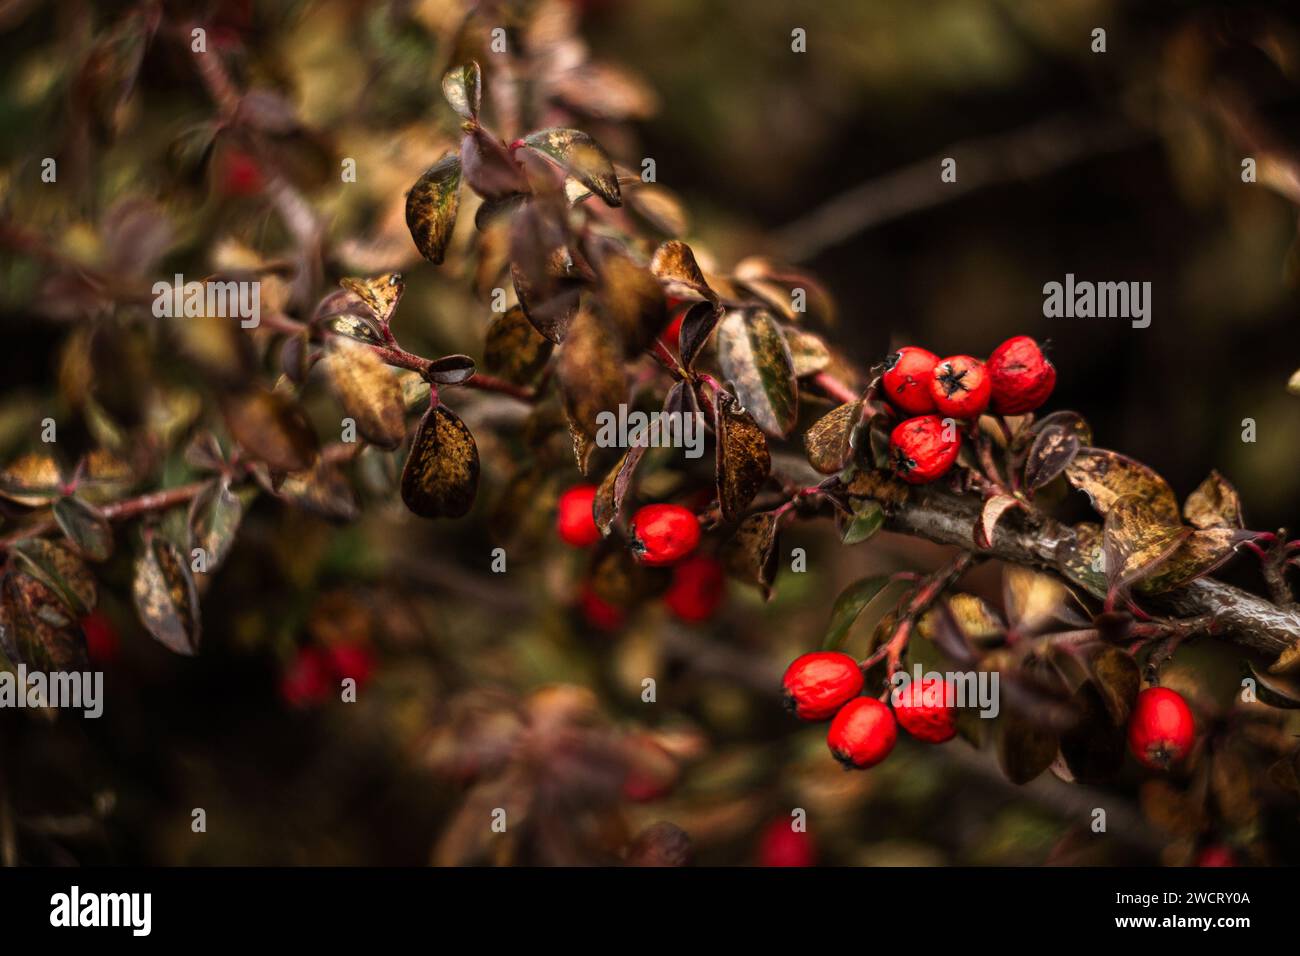 branches of a Cotoneaster bush with red berries Stock Photo